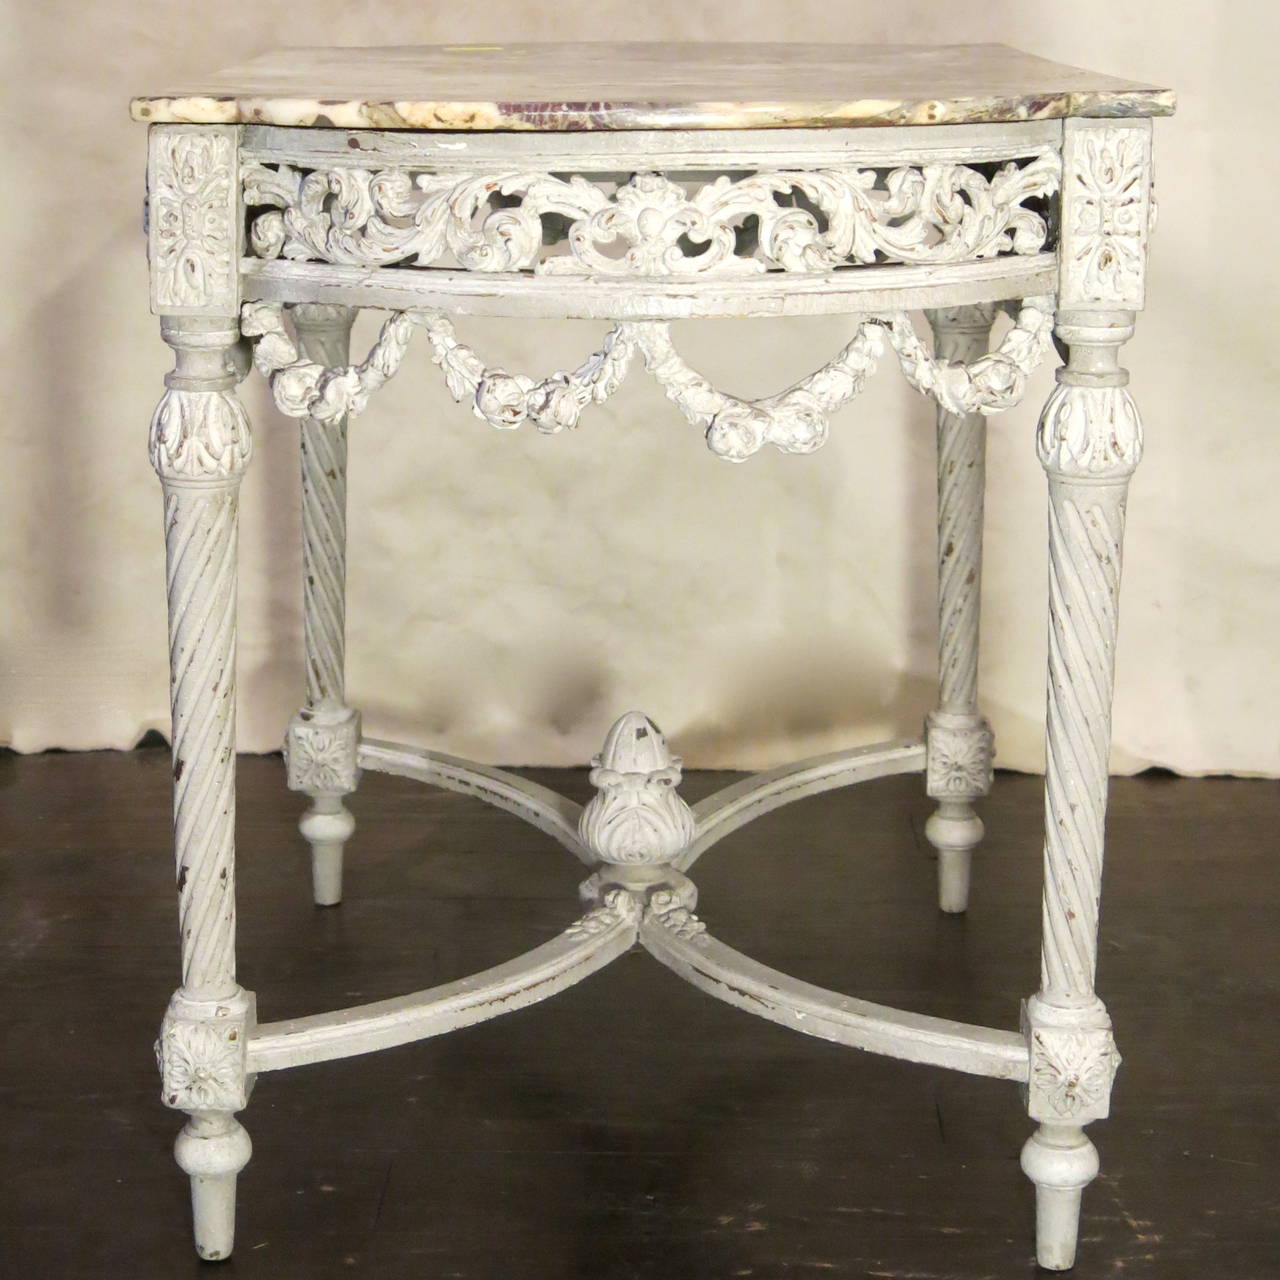 Antique French 19th century Louis XVI style table with curved sides, detailing on all four sides, and original marble with colors of grey, tan, and aubergine.